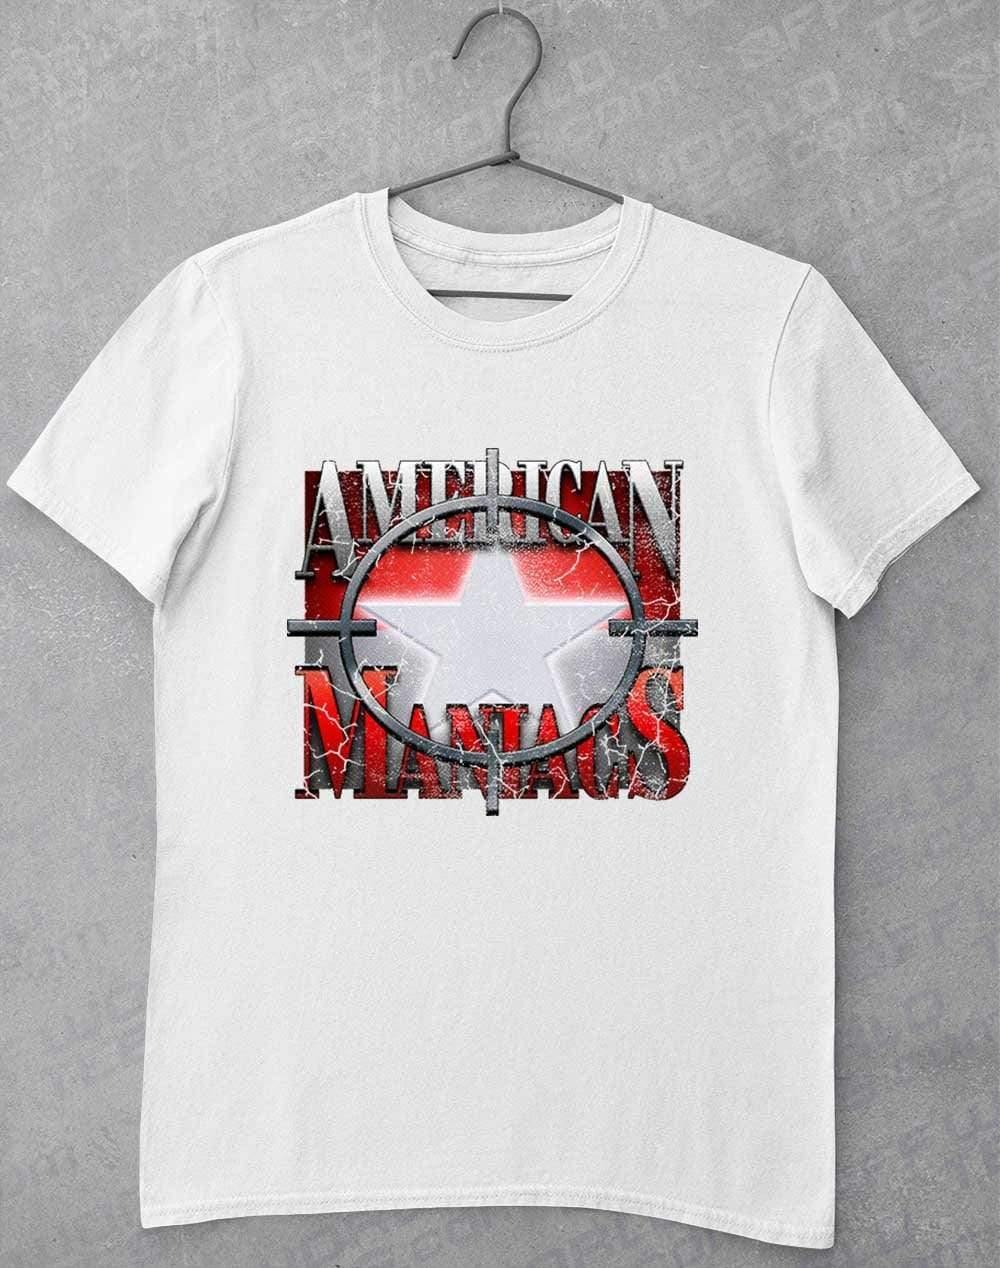 American Maniacs - T-Shirt S / White  - Off World Tees